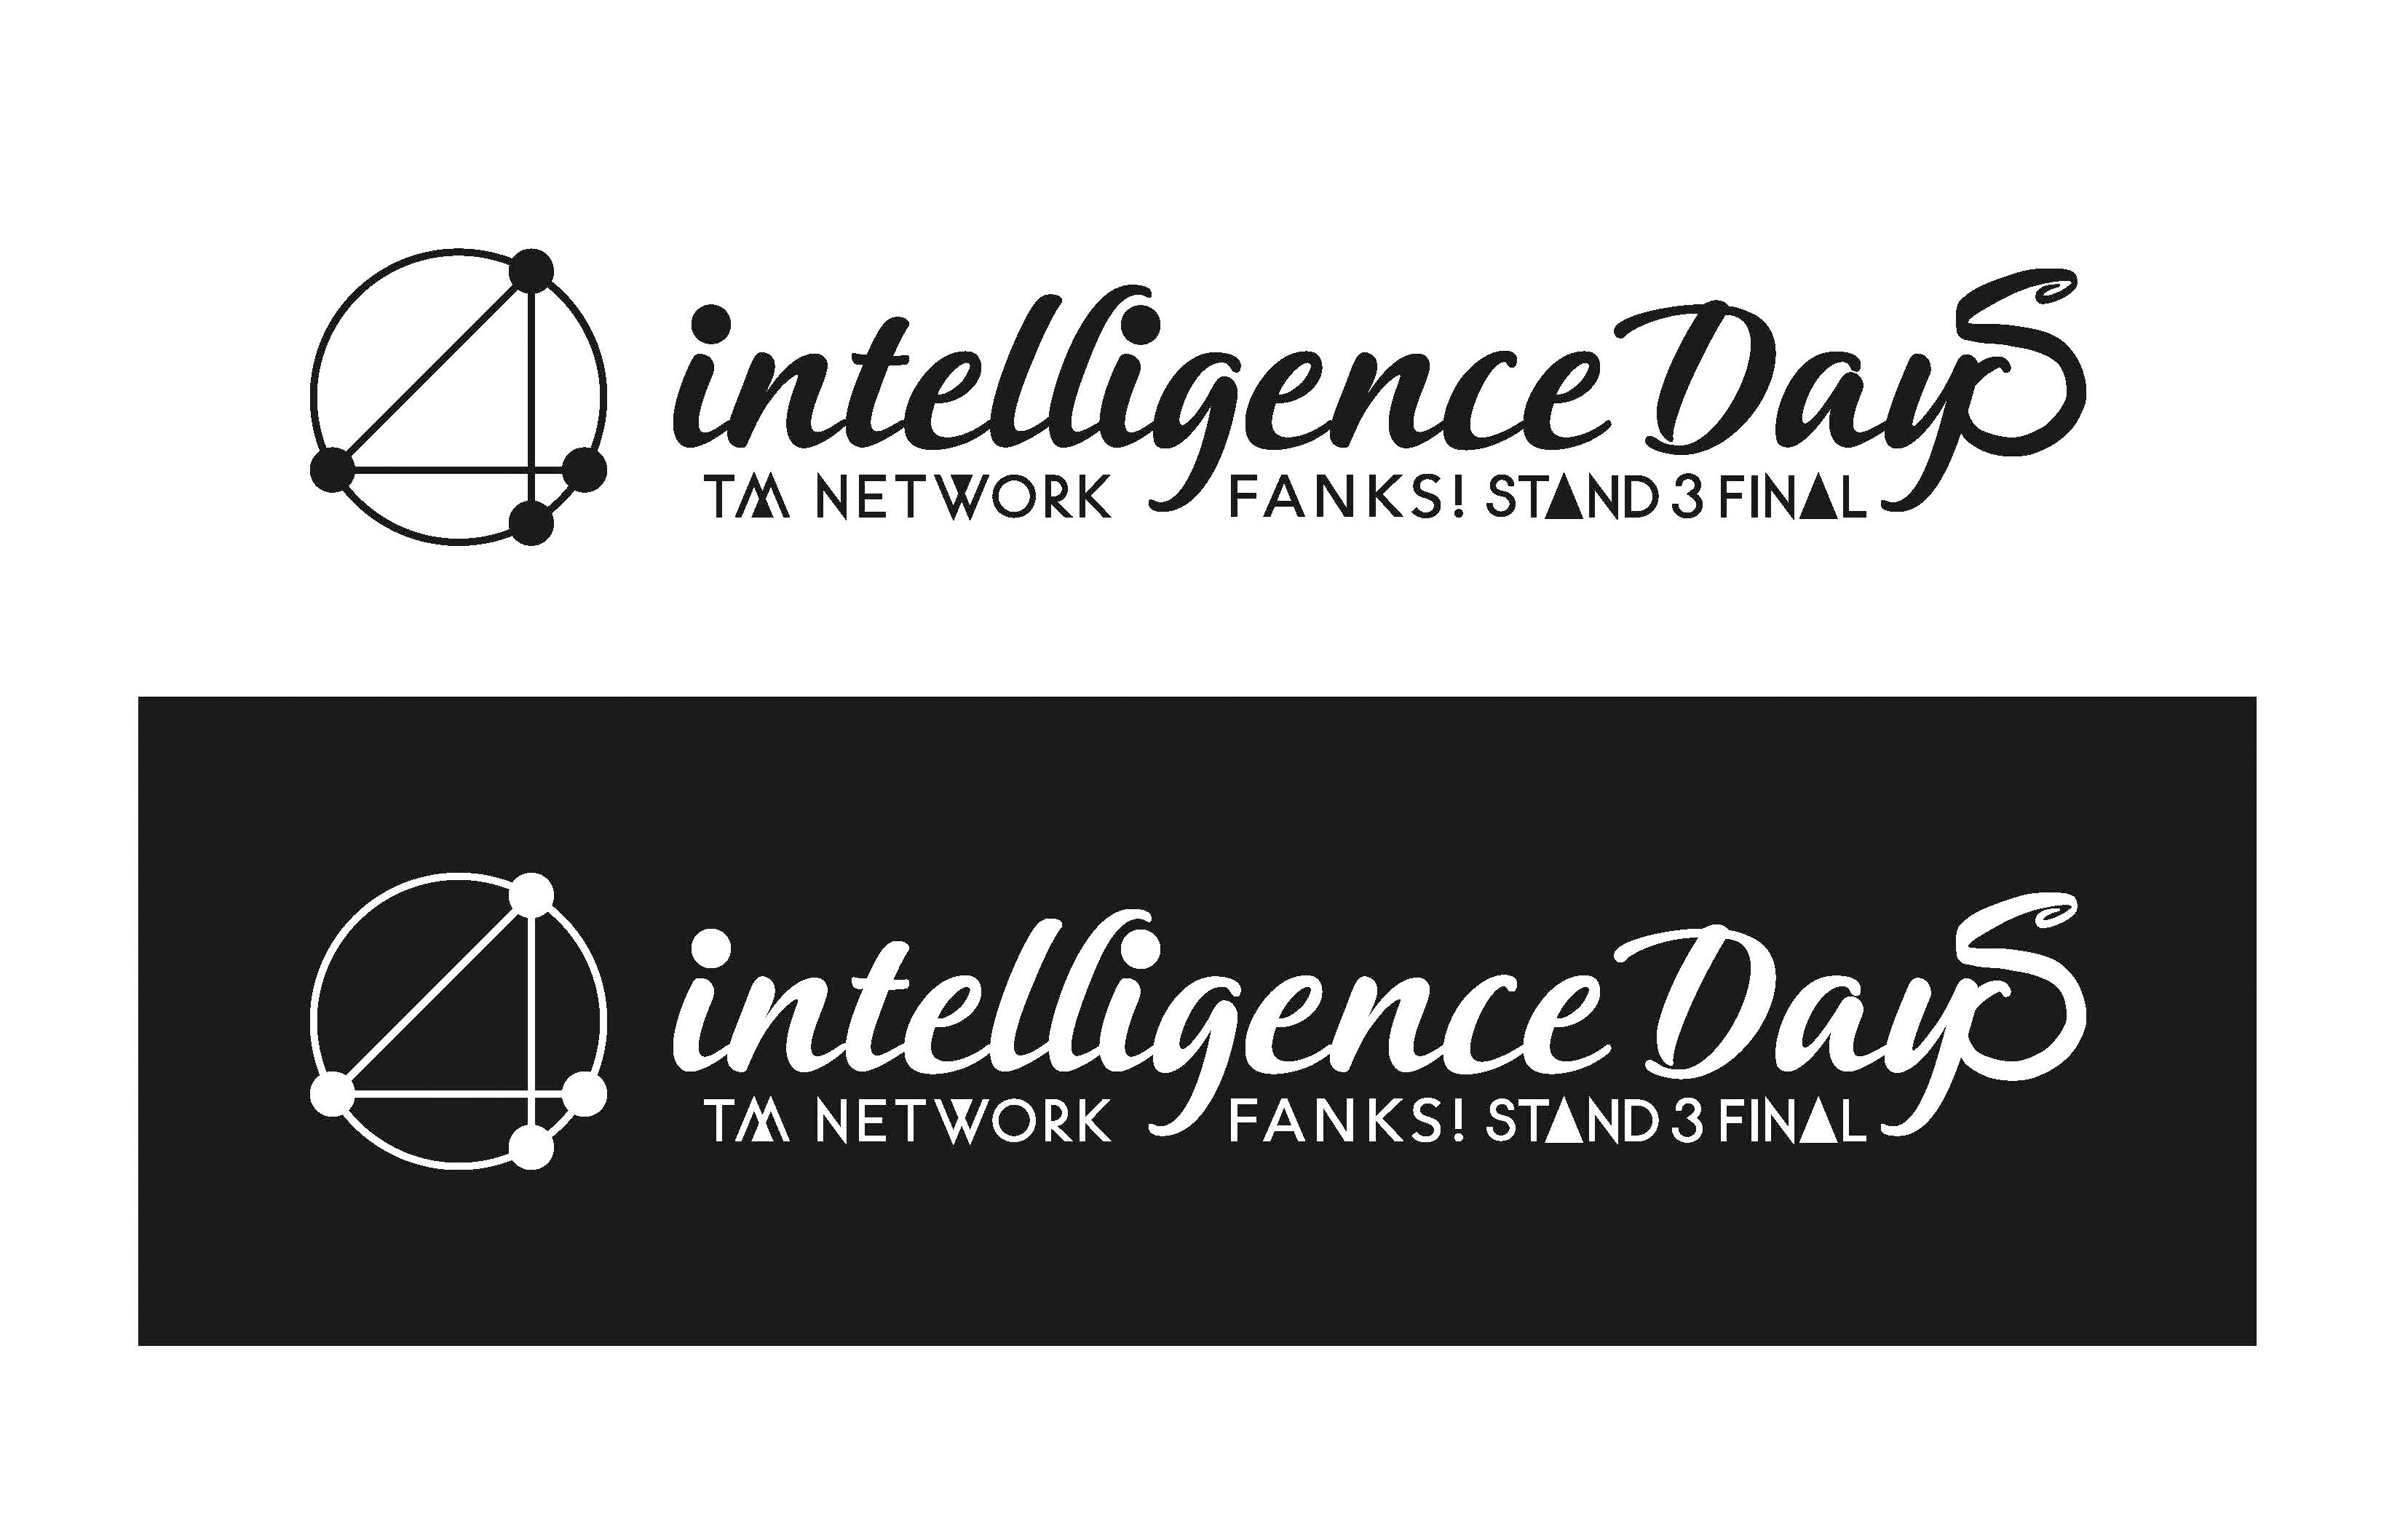 TM NETWORK 40th FANKS intelligence Days～STAND 3 FINAL～AFTER 